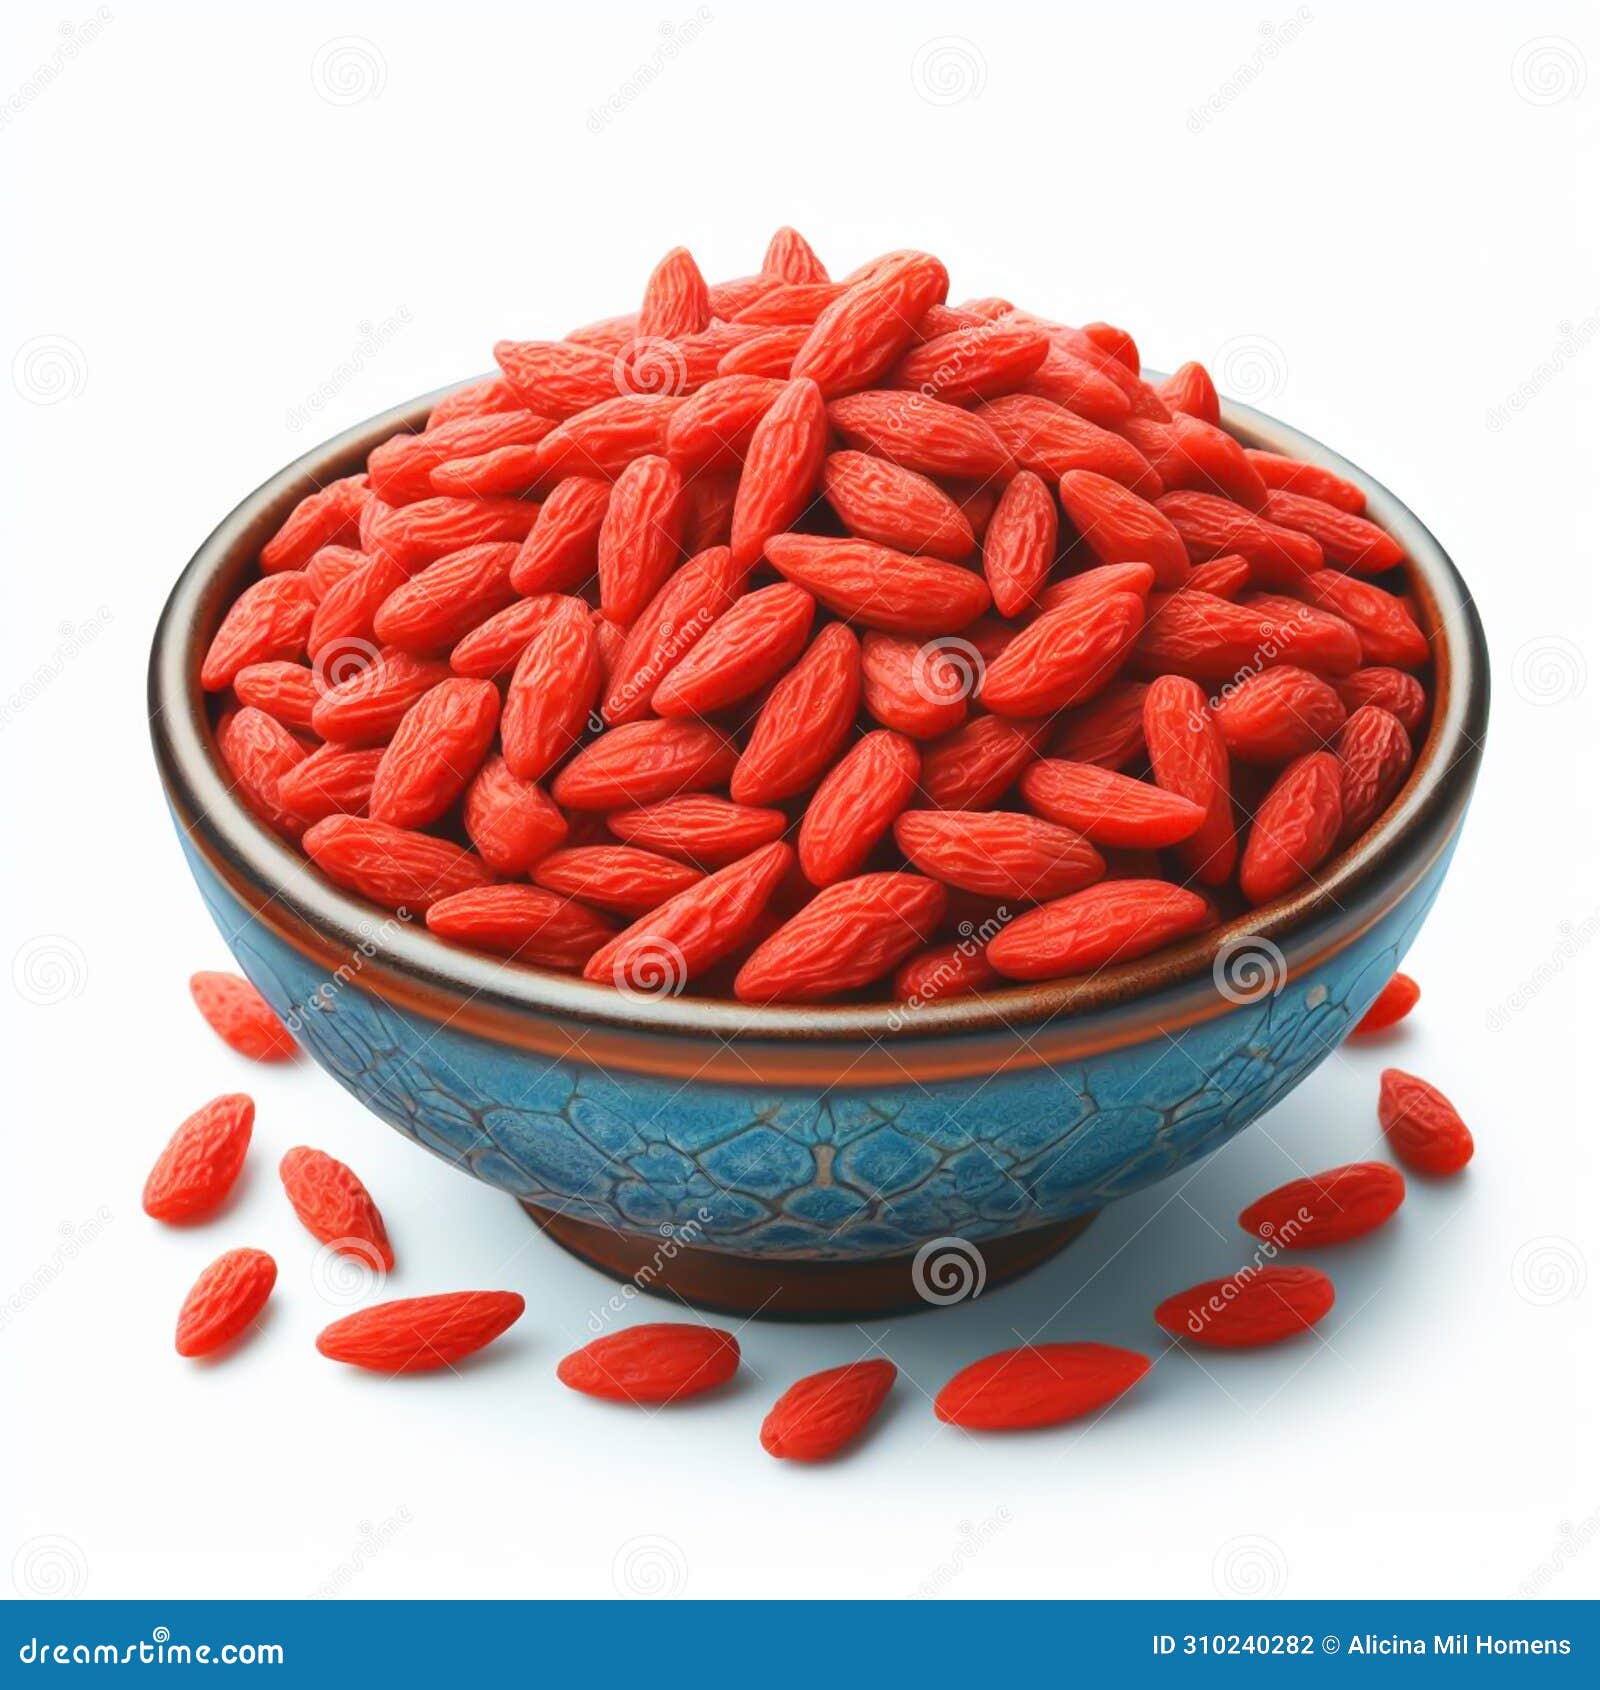 goji berry, known for being rich in nutrients, originates from china. healthy food. ai generated